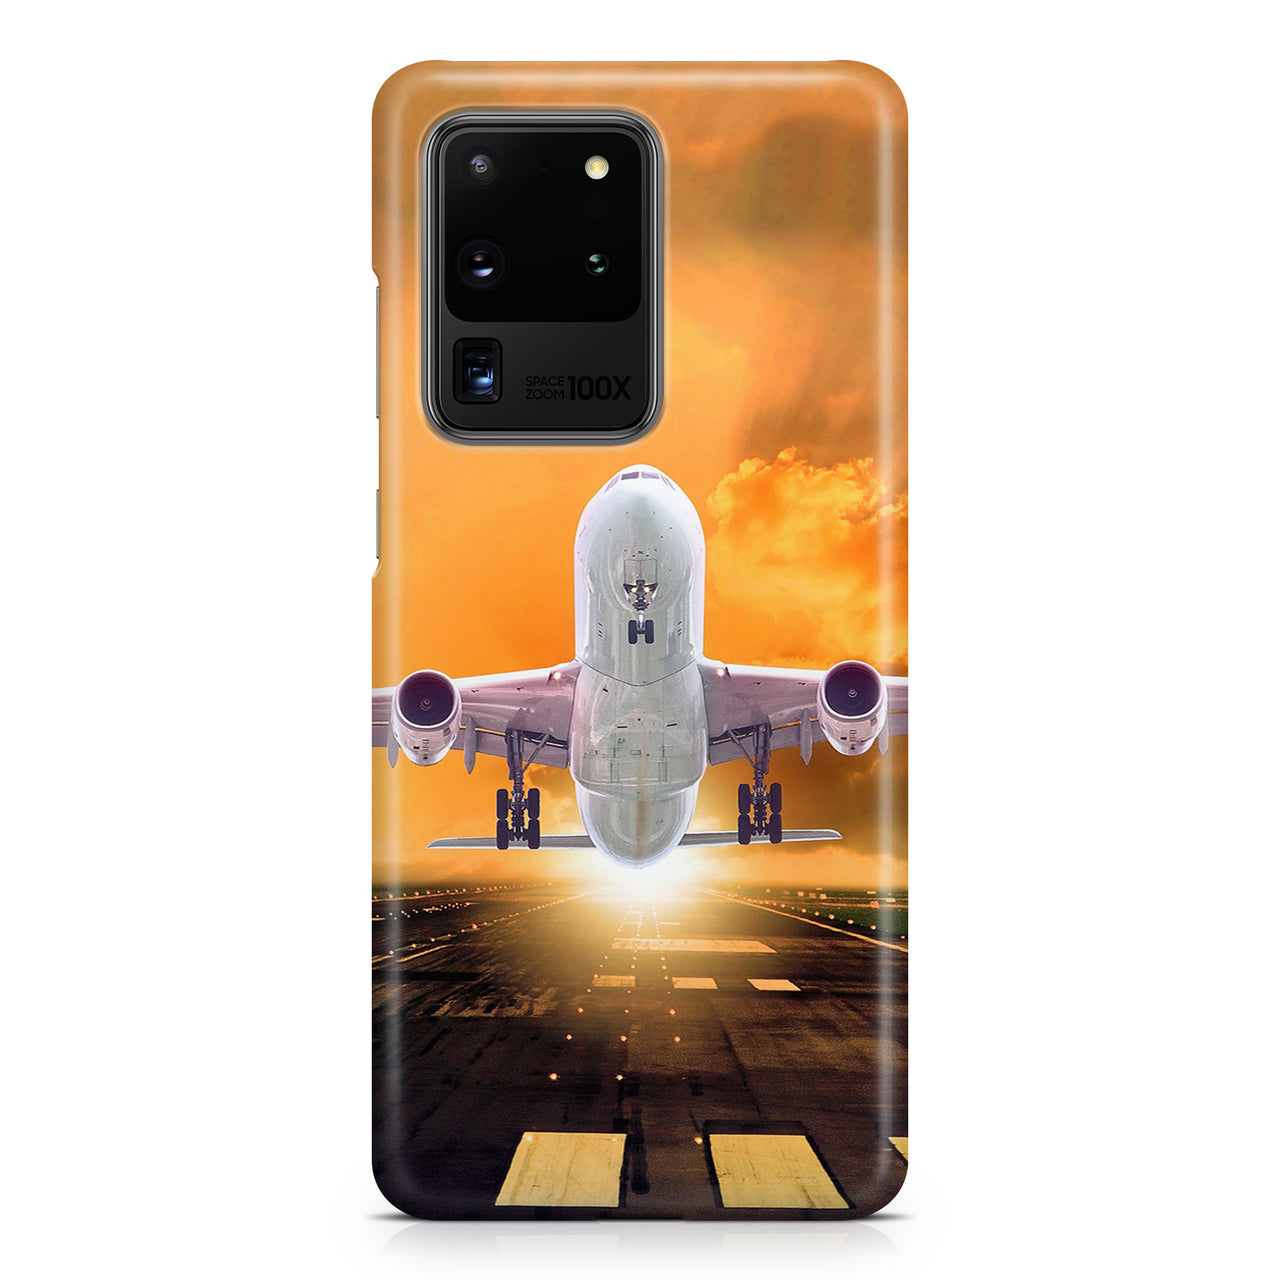 Amazing Departing Aircraft Sunset & Clouds Behind Samsung A Cases